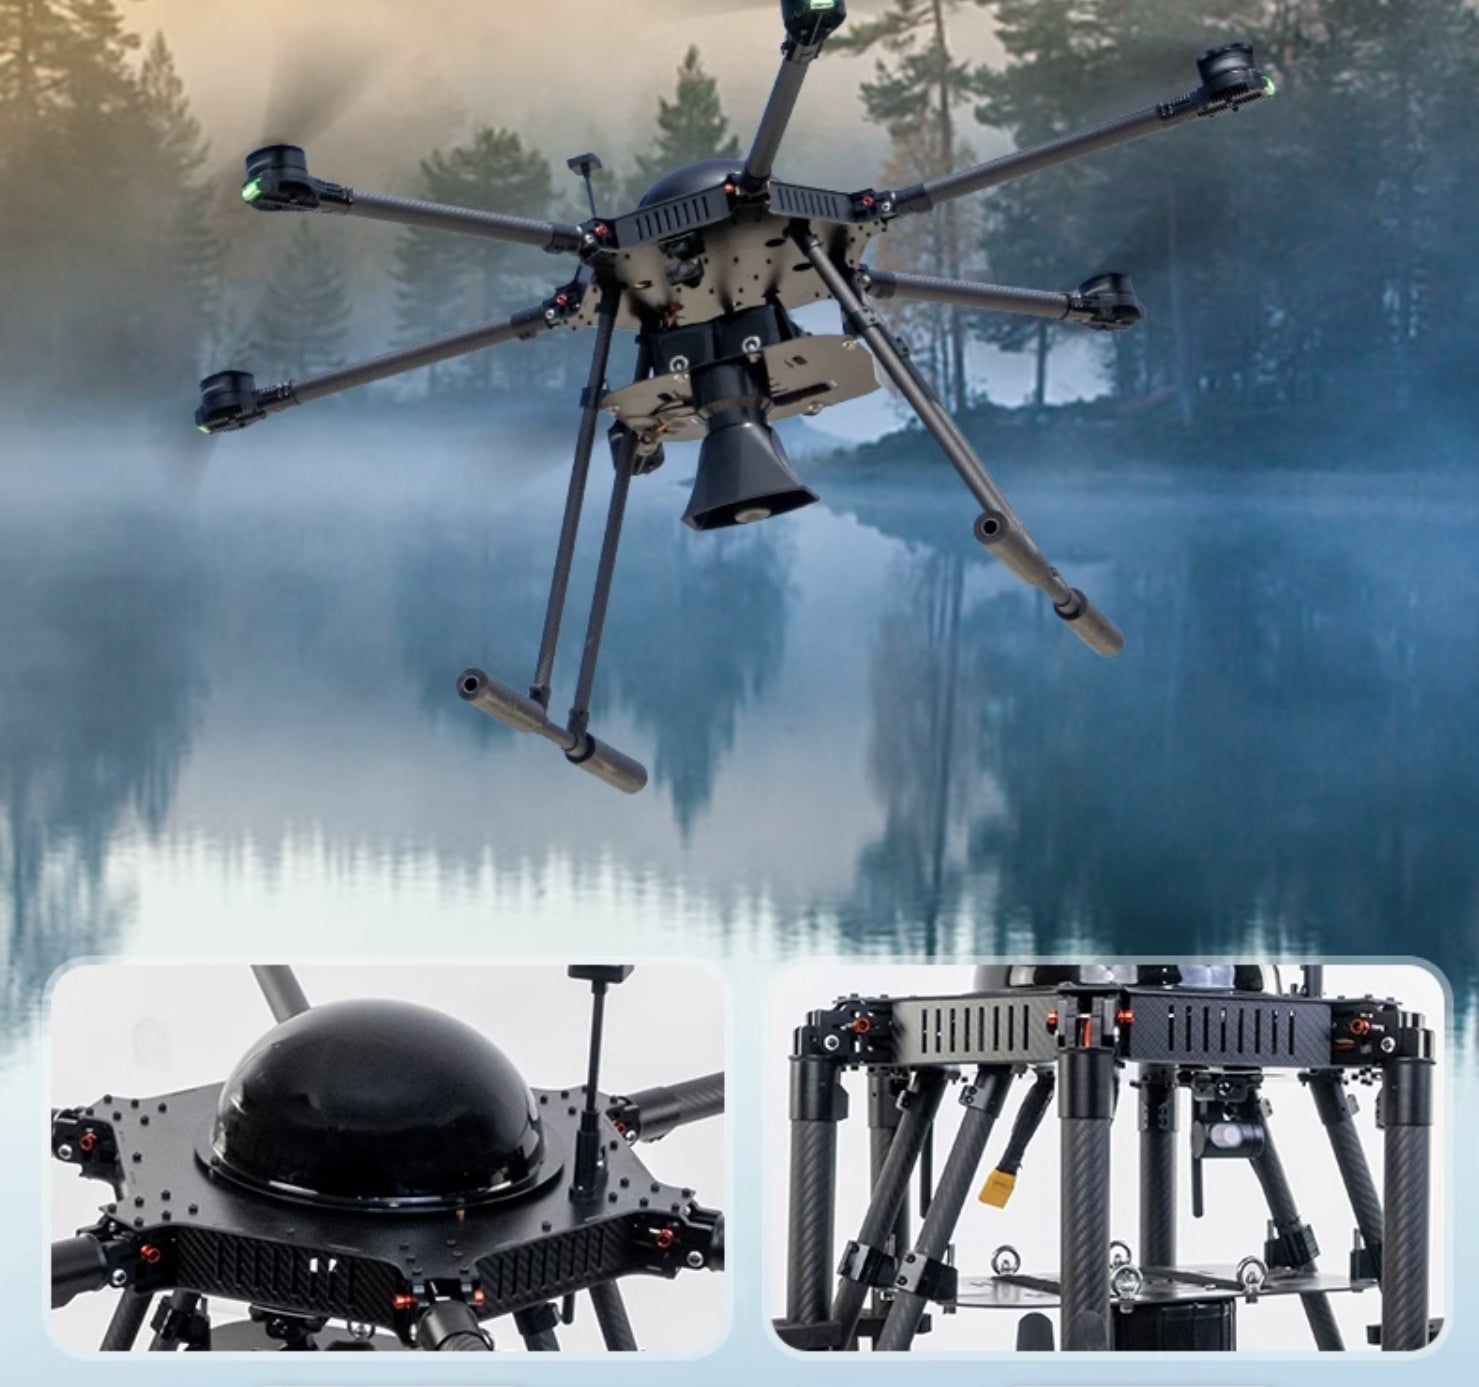 RCDrone, the drone's high-altitude capability allows the light to cover large areas .